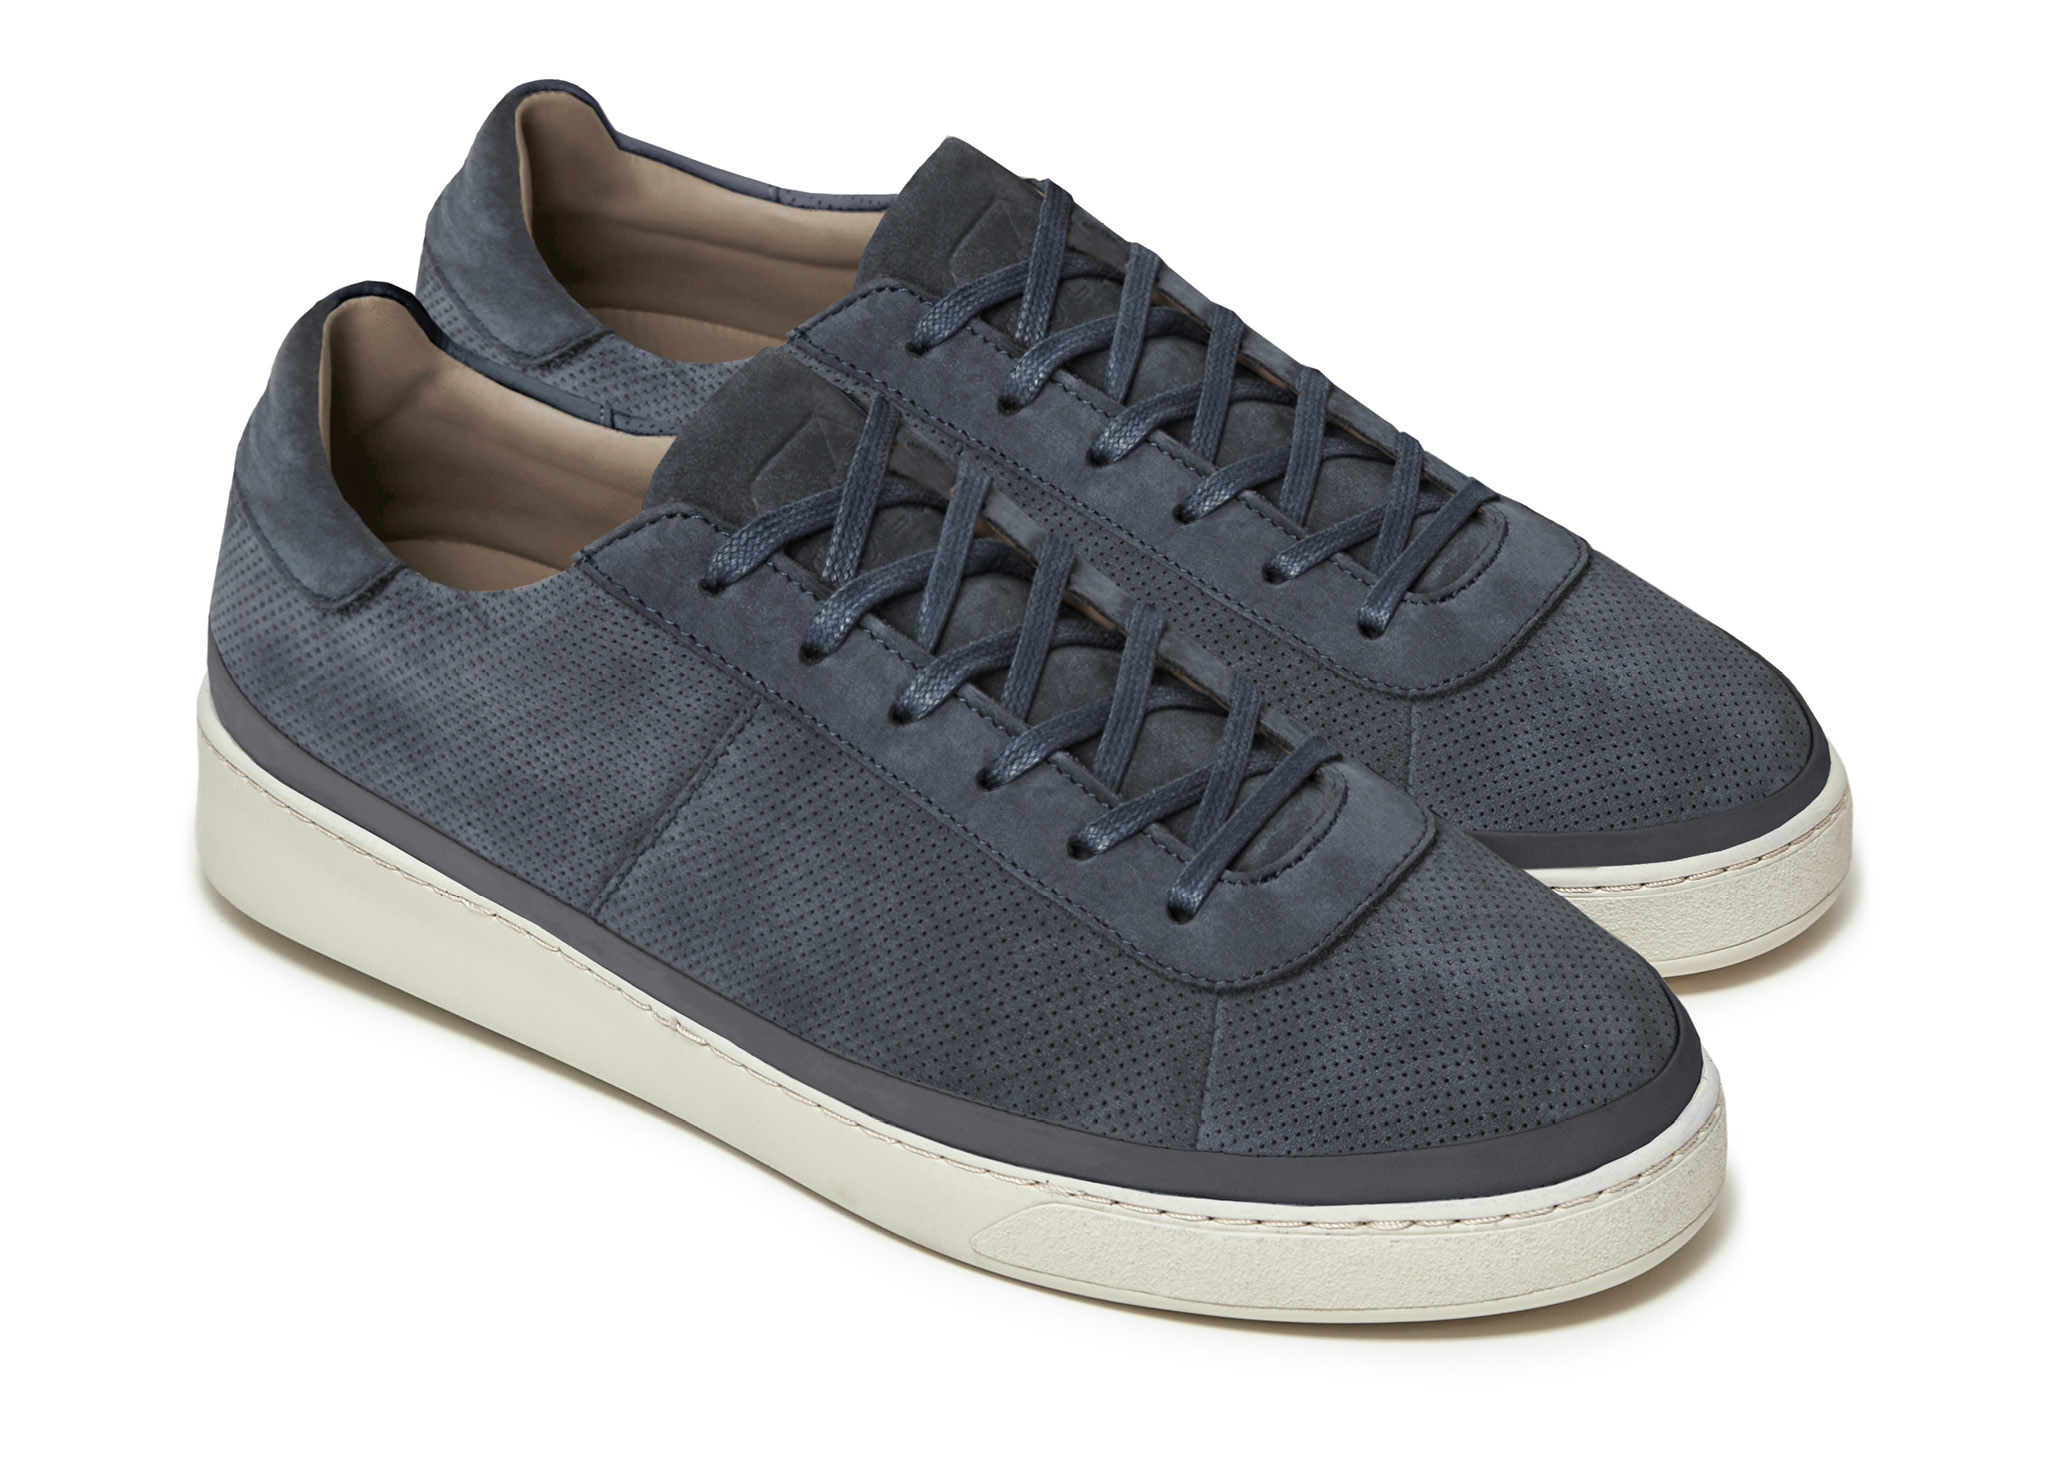 Slate Blue Perforated Nubuck Sneakers for Men